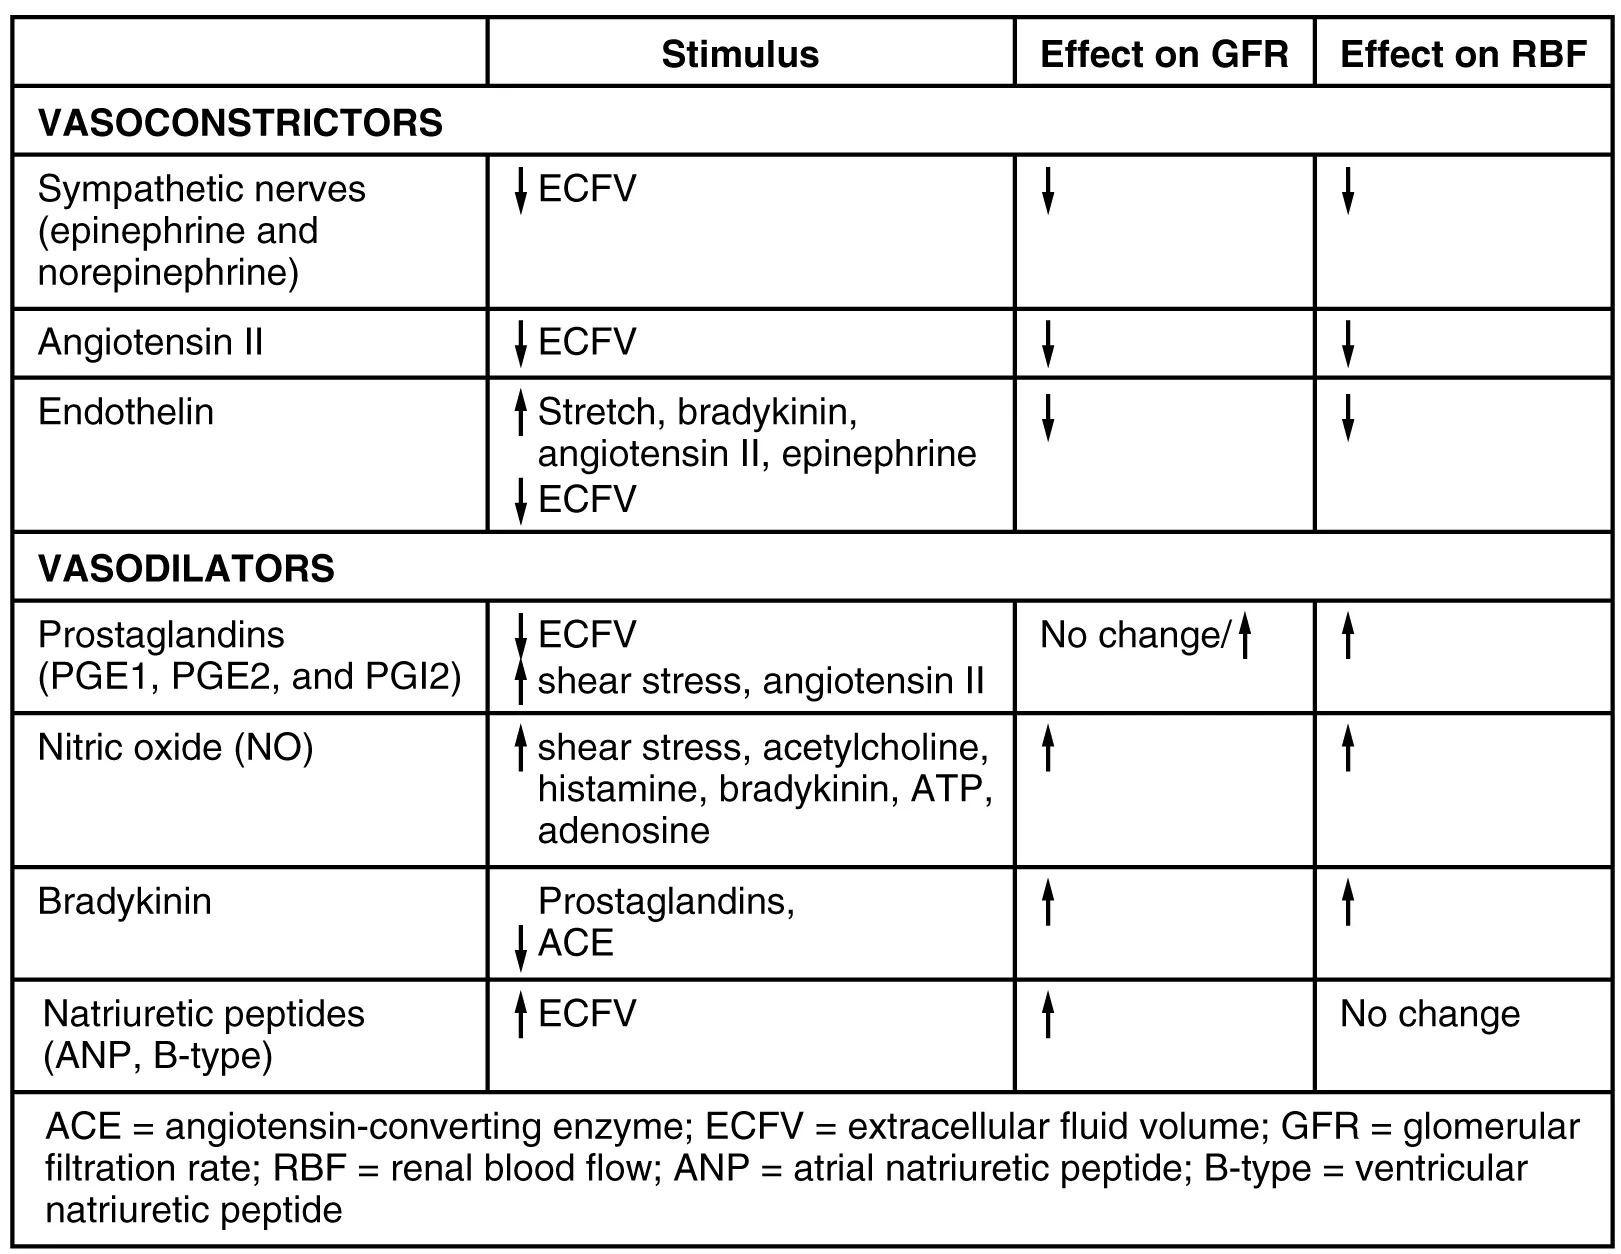 This table shows the stimulus, effect on GFR (glomerular filtration rate), and effect on RBF (renal blood flow) for a variety of vasoconstrictors and vasodilators. The first vasoconstrictor is input from the sympathetic nerves that result in the secretion of epinephrine and norepinephrine. The stimulus is a decrease in extracellular fluid volume (ECFV). The second vasoconstrictor is angiotensin II. The stimulus is a decrease in ECFV. The third vasoconstrictor is endothelin. The stimulus is an increase in stretch, bradykinin, angiotensin II, and epinephrine along with a decrease in ECFV. All three of these vasoconstrictors decrease GFR and also decrease RBF. The first vasodilator is the prostaglandins PGE1, PGE2, and PGI2. The stimulus is a decrease in ECFV, an increase in shear stress, and  an increase in angiotensin II. The second vasodilator is nitric oxide (NO). The stimulus is increasing shear stress, acetylcholine, histamine, bradykinin, ATP, and adenosine. The third vasodilator is bradykinin. The stimulus is the presence of prostaglandins and a decrease in angiotensin-converting enzyme. The fourth vasodilator is natriuretic peptides, including ANP and B-type. The stimulus is an increase in ECFV. All four of the vasodilators increase GFR and also increase RBF, with the exception of the natriuretic peptides, which cause no change in RBF. Prostaglandins also either increase or have no effect on GFR. 